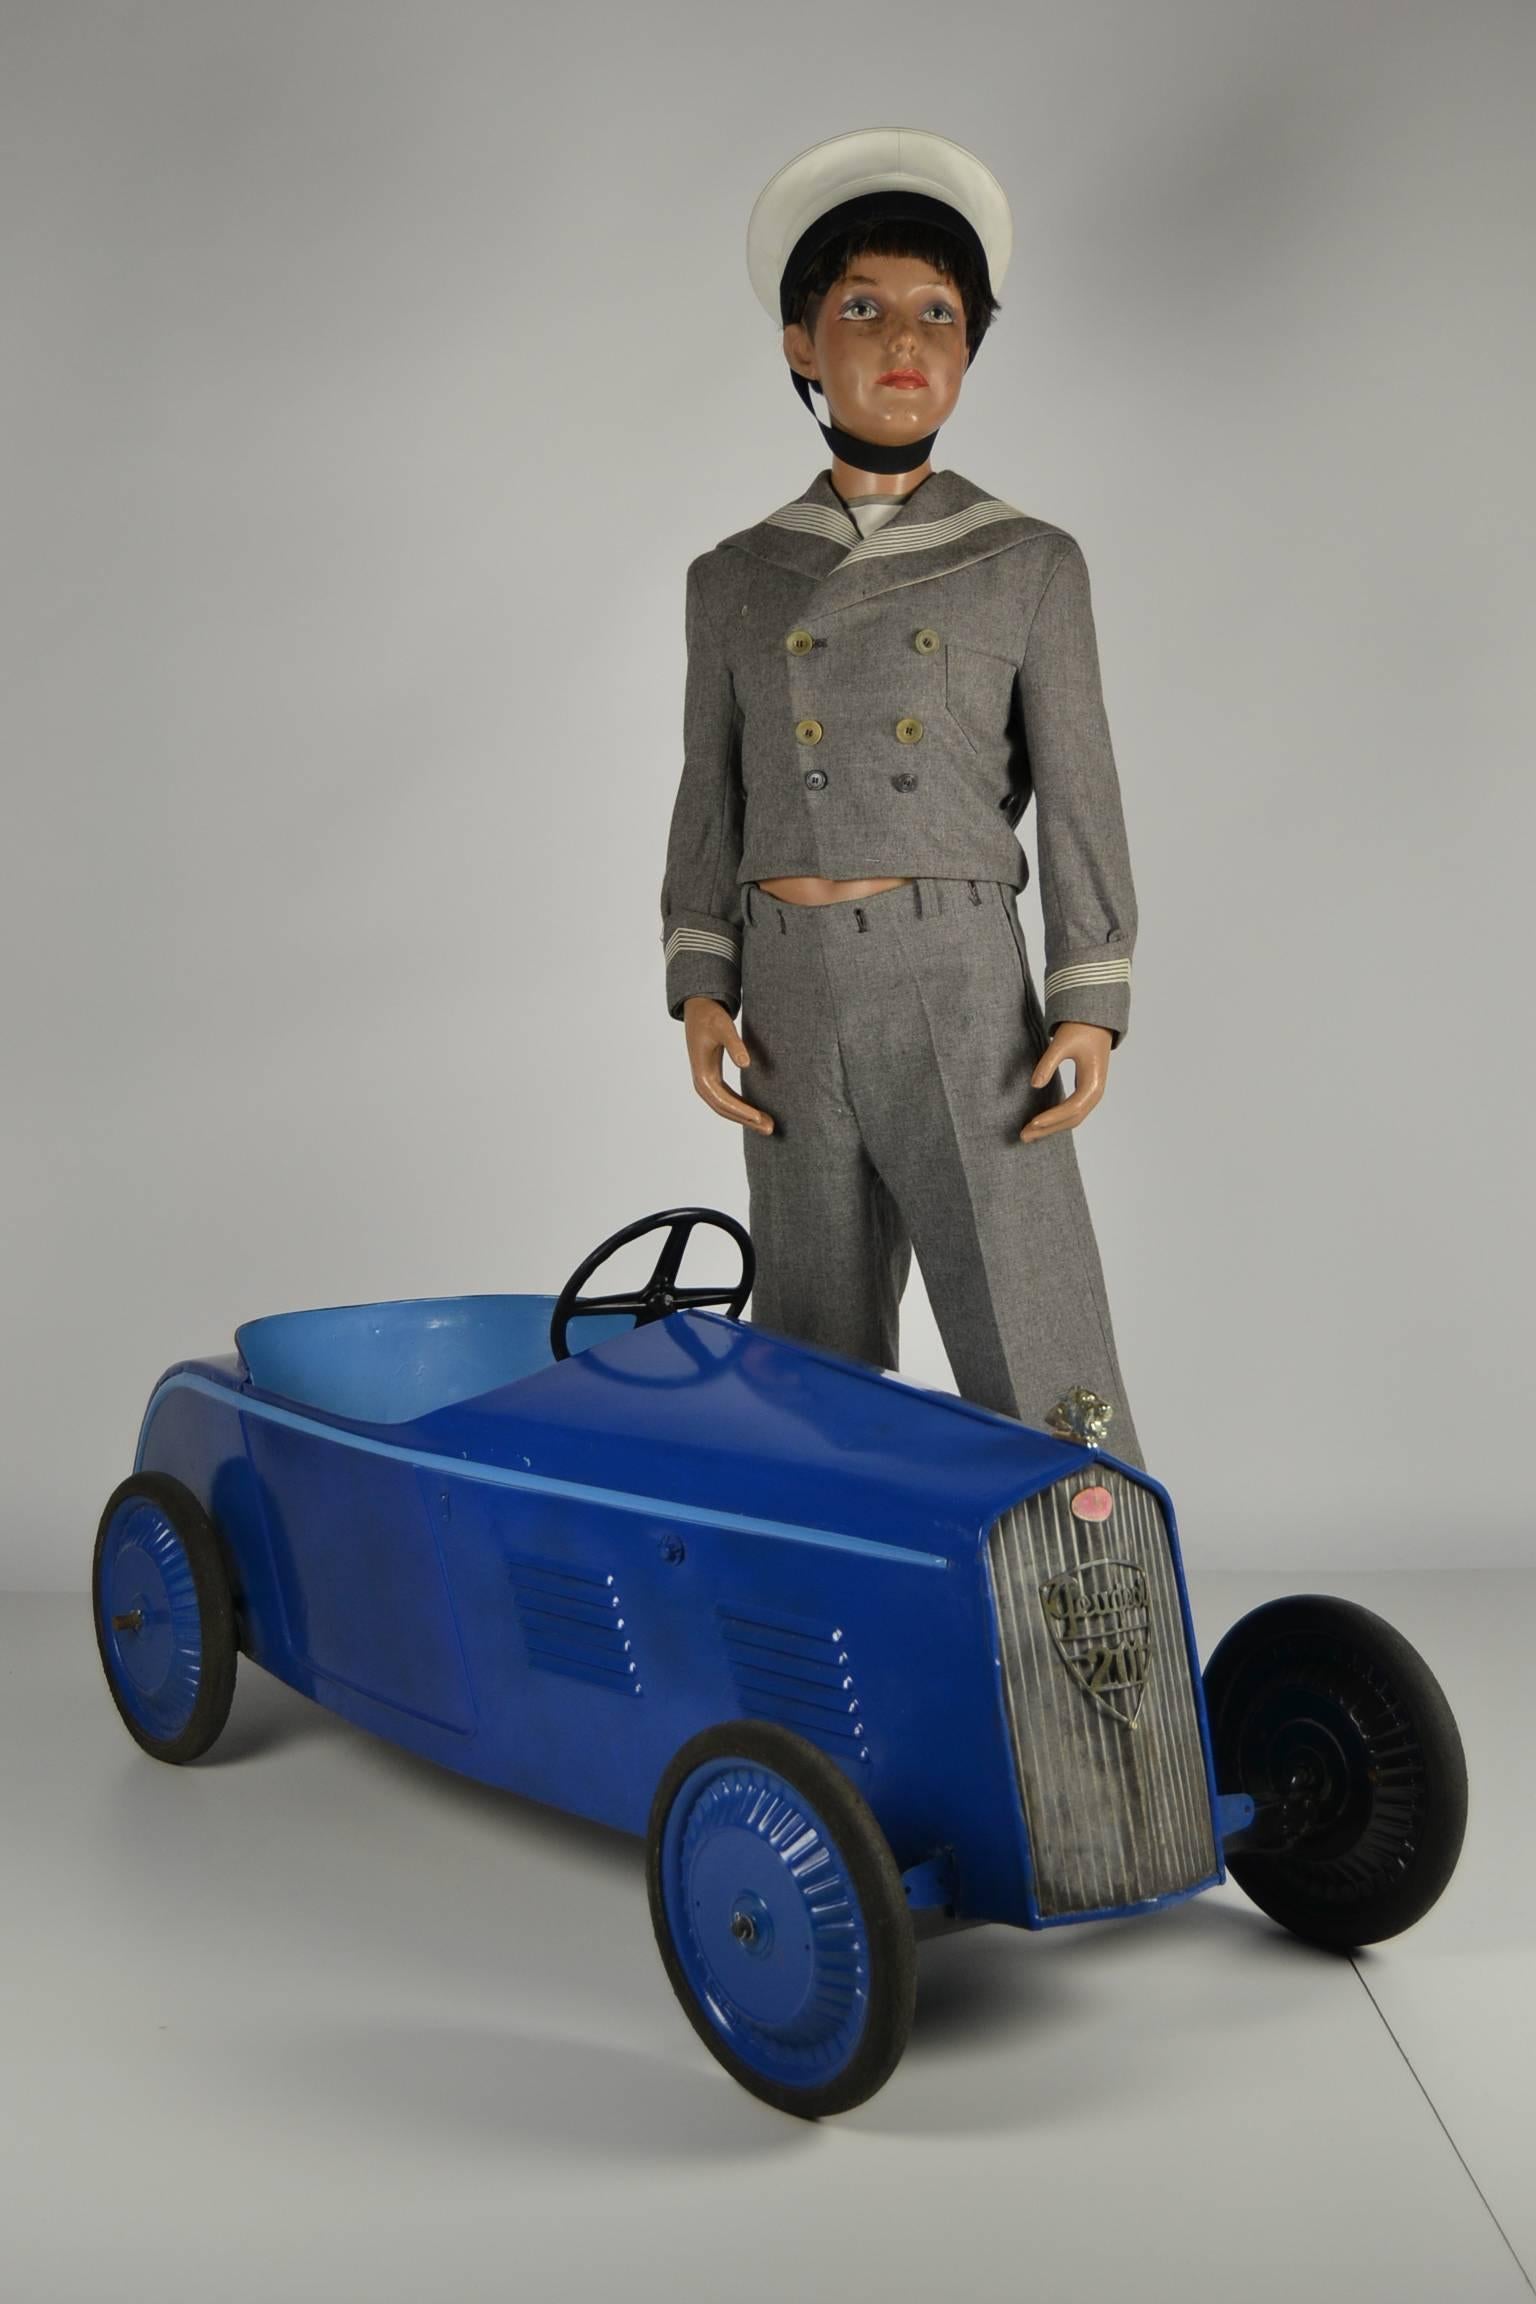 Authentic Pedal Car made by Euréka . 
This French company was already active in the late 19th century 
and started to produce Pedal Cars in1922.
 
This Child's Car is a model produced from 1935 - 1940
and made of solid metal. 
It's a basic